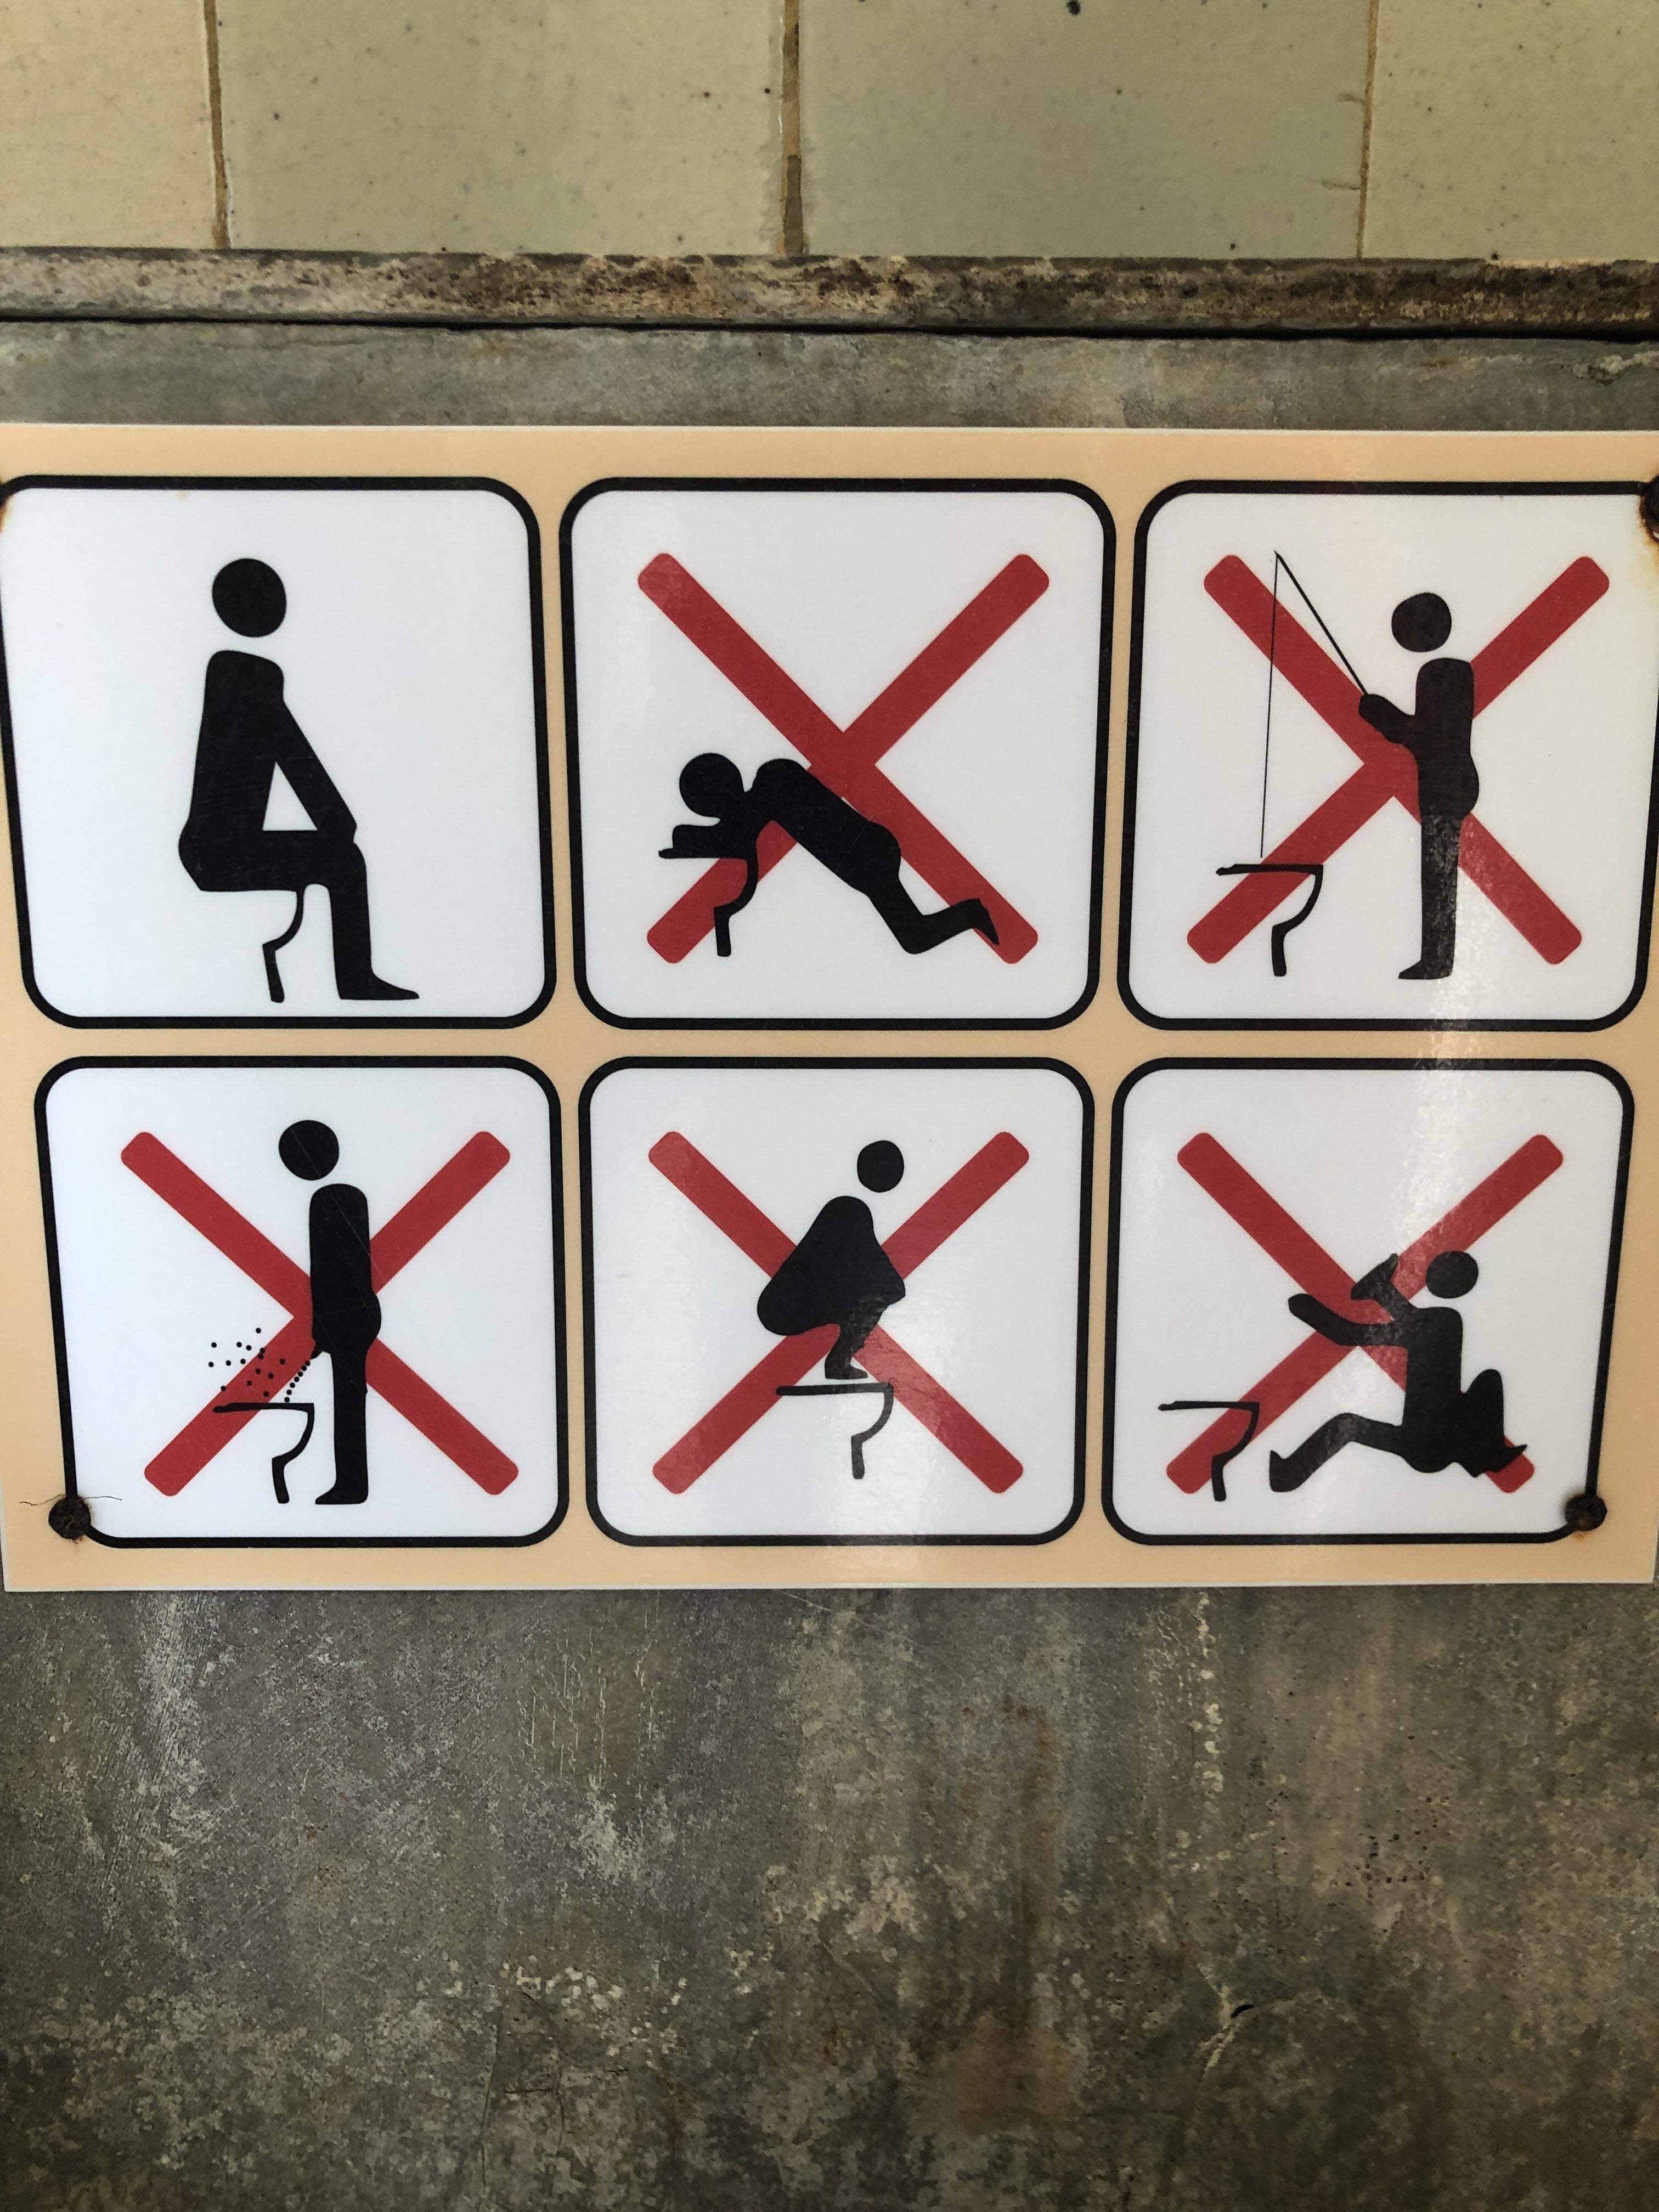 The last one is called; the SCWIFTY shit on the floor slav